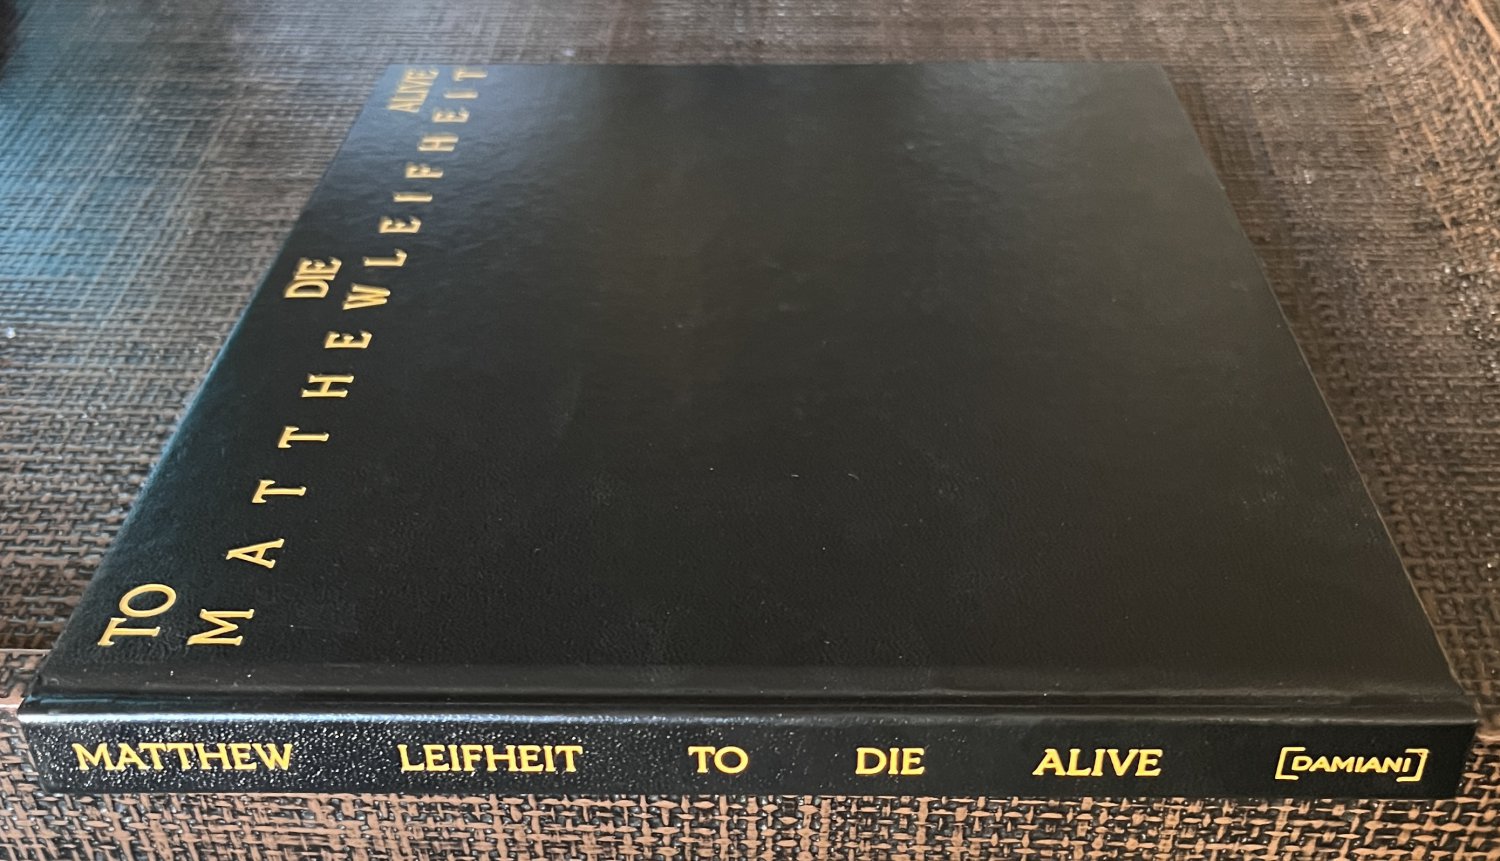 TO DIE ALIVE (2022) MATTHEW LEIFHEIT Gay Fire Island Male NUDES Photography Queer Erotic Photos